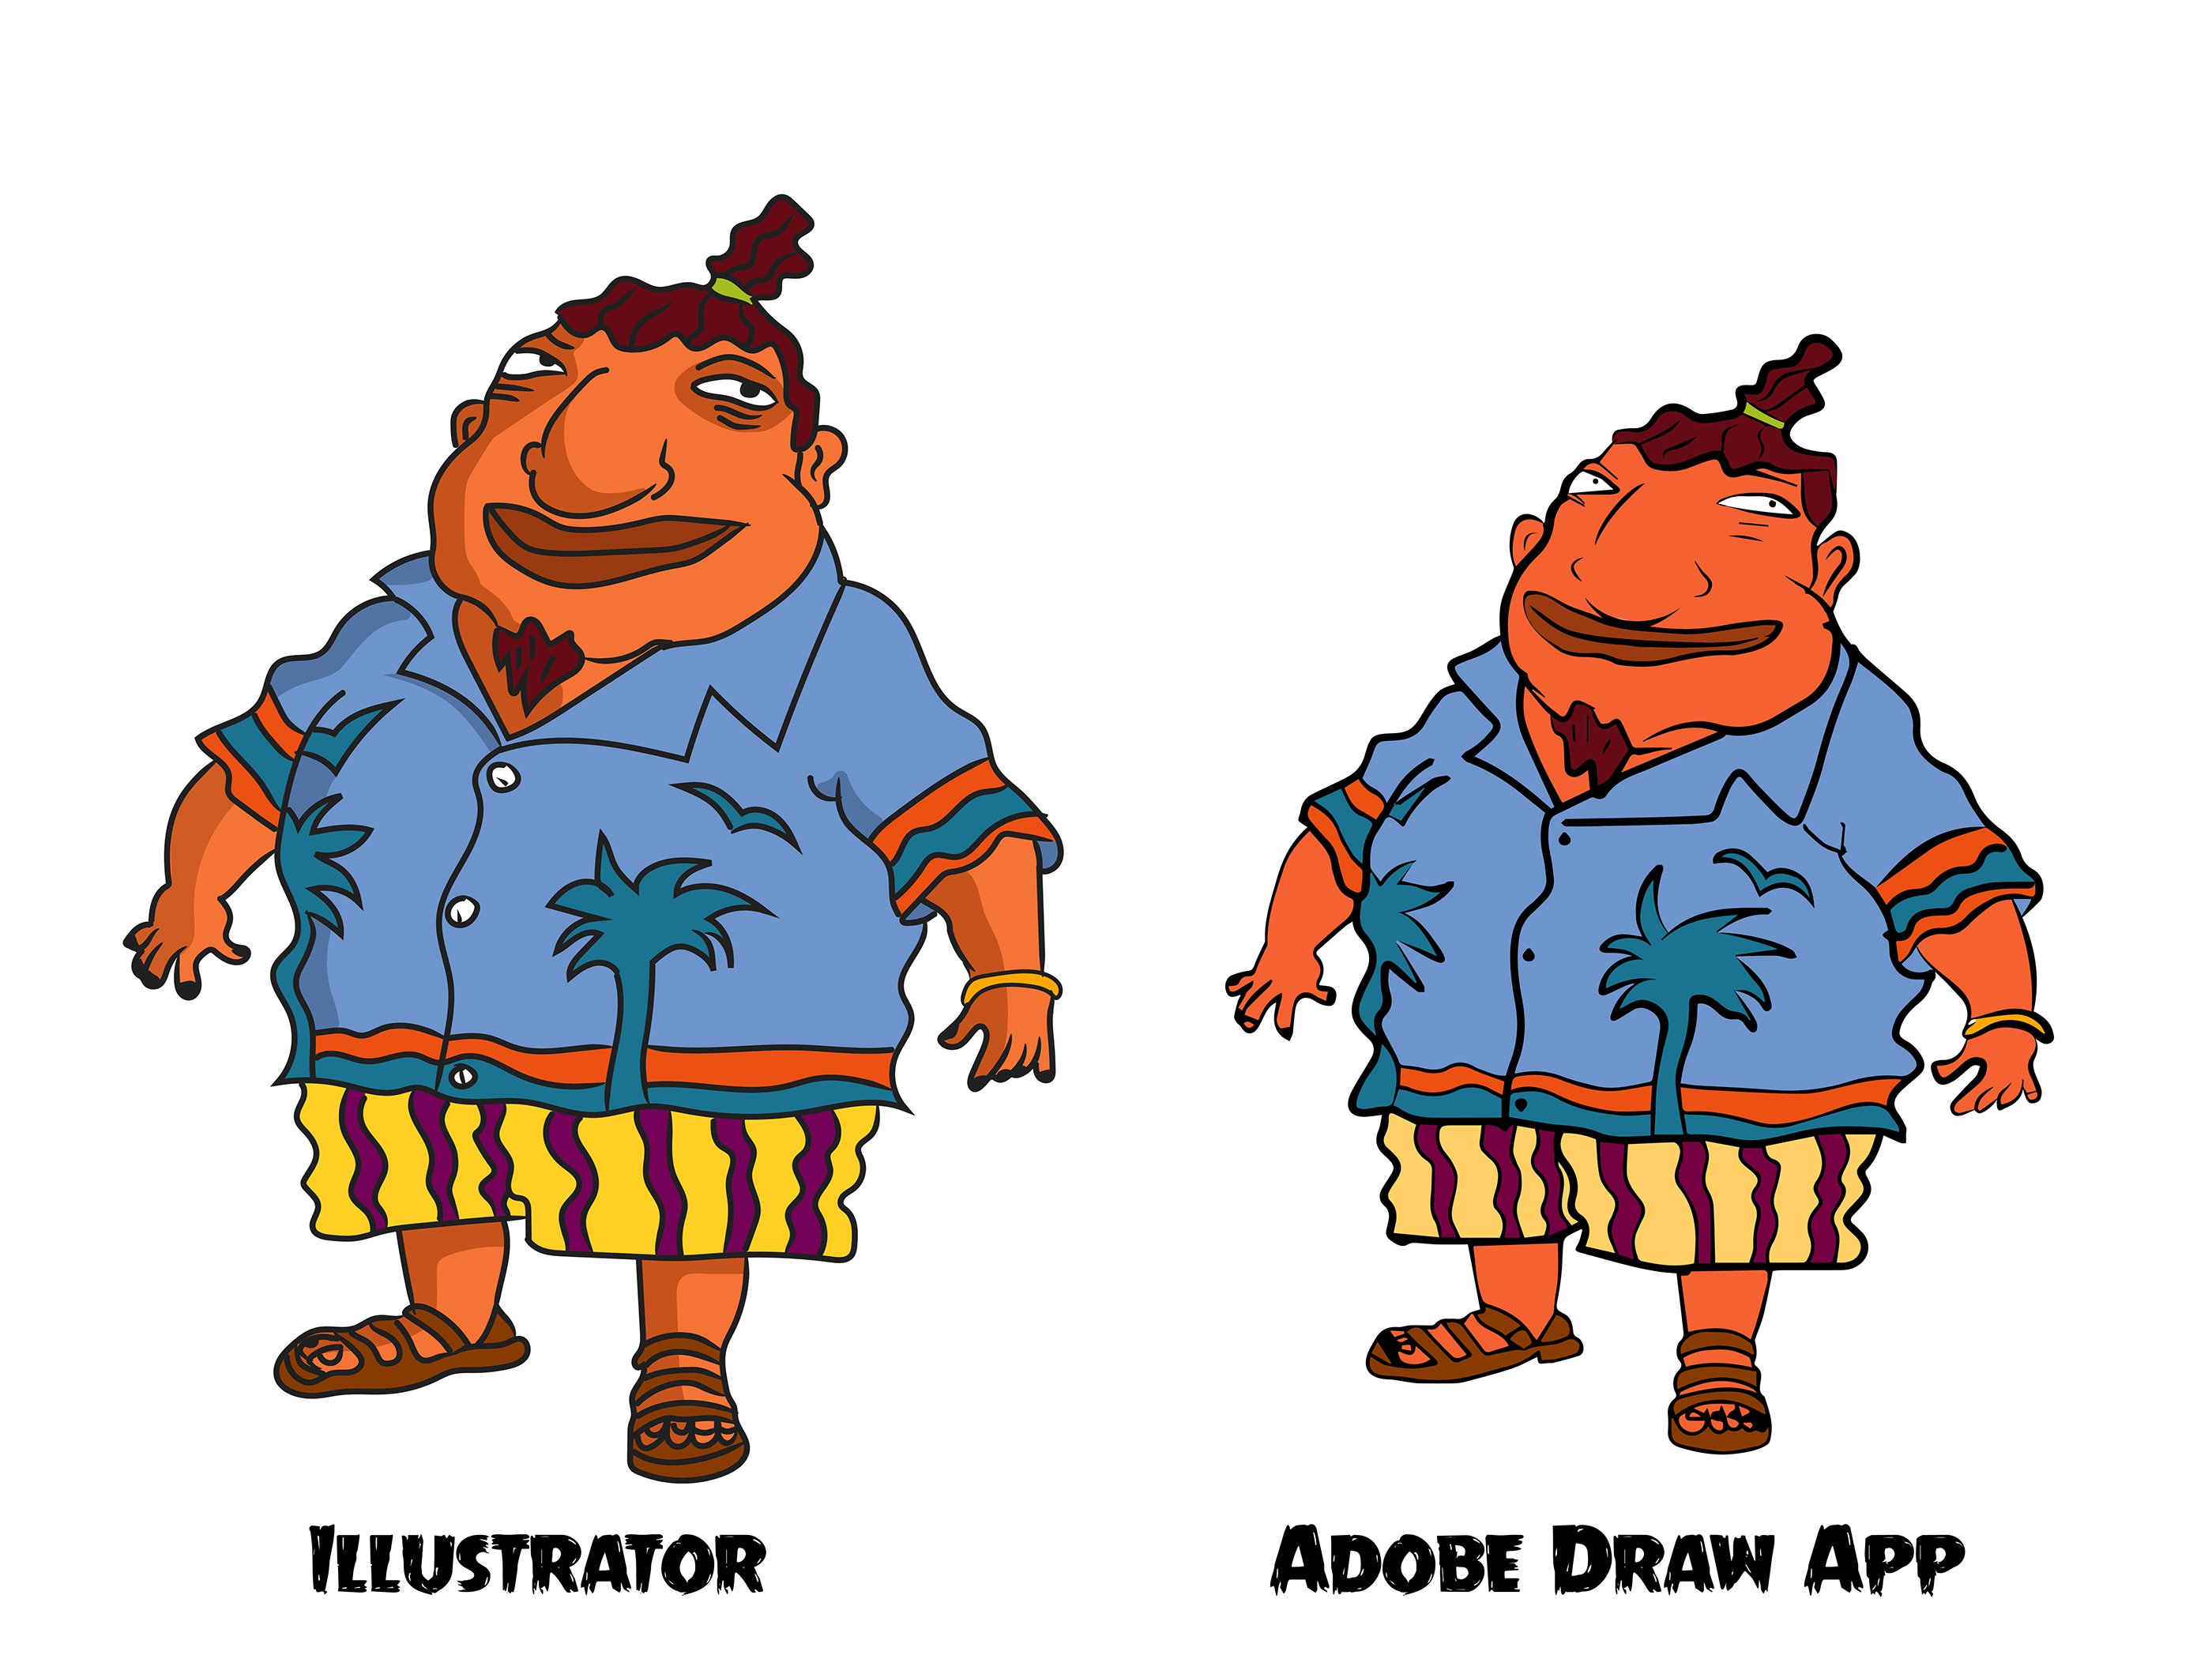 Tito from Rocket Power! 